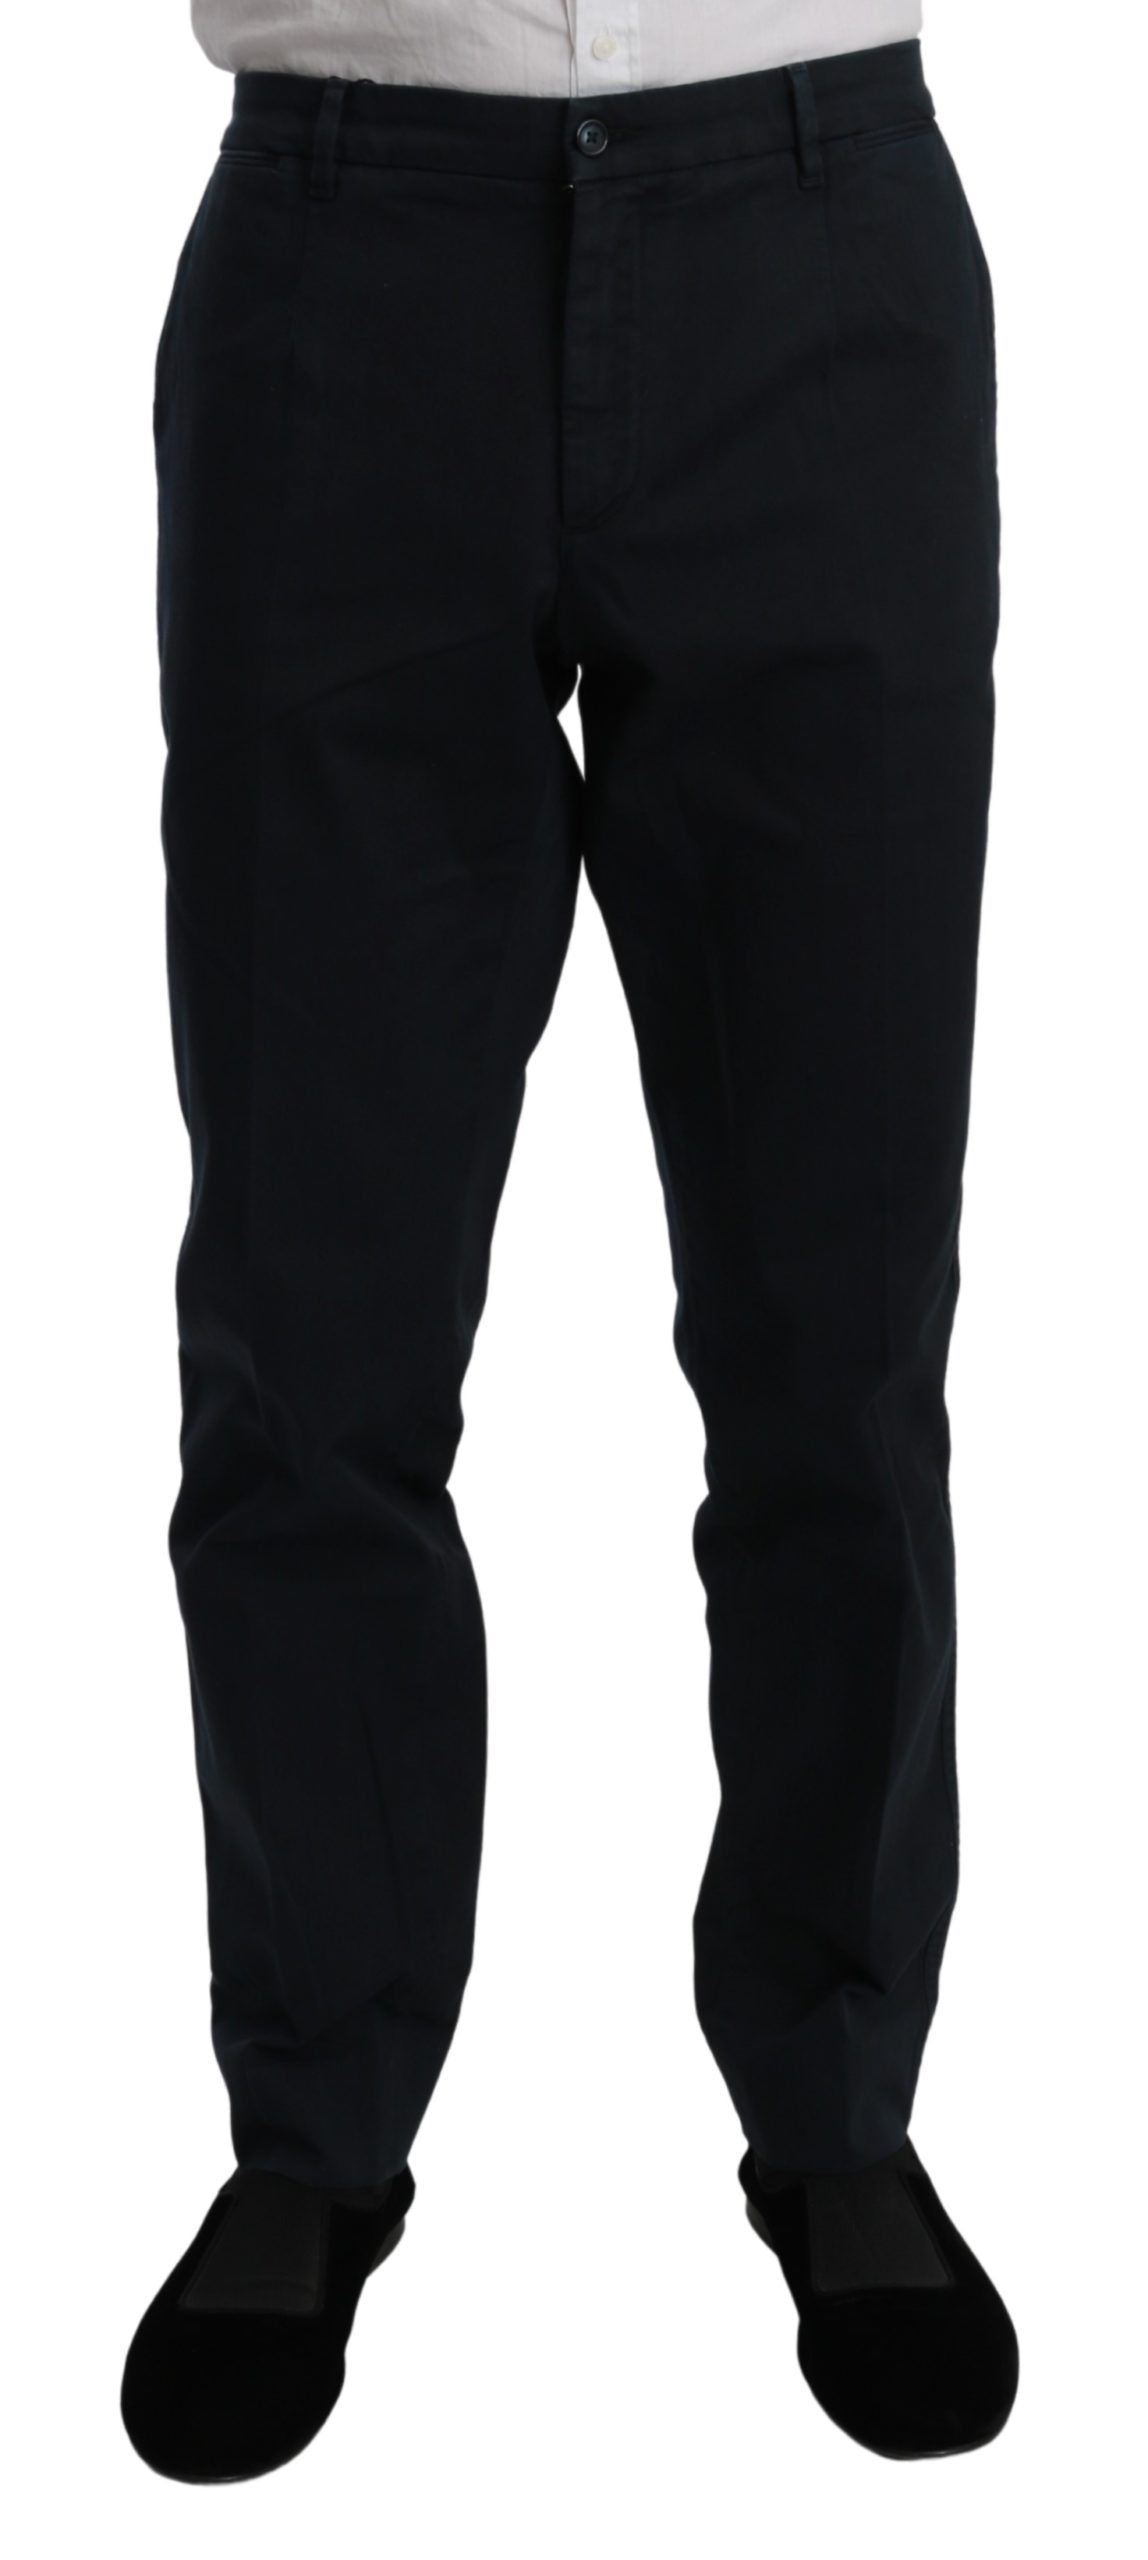 Dolce & Gabbana Blue Chinos Stretch Cotton Jeans Trouser